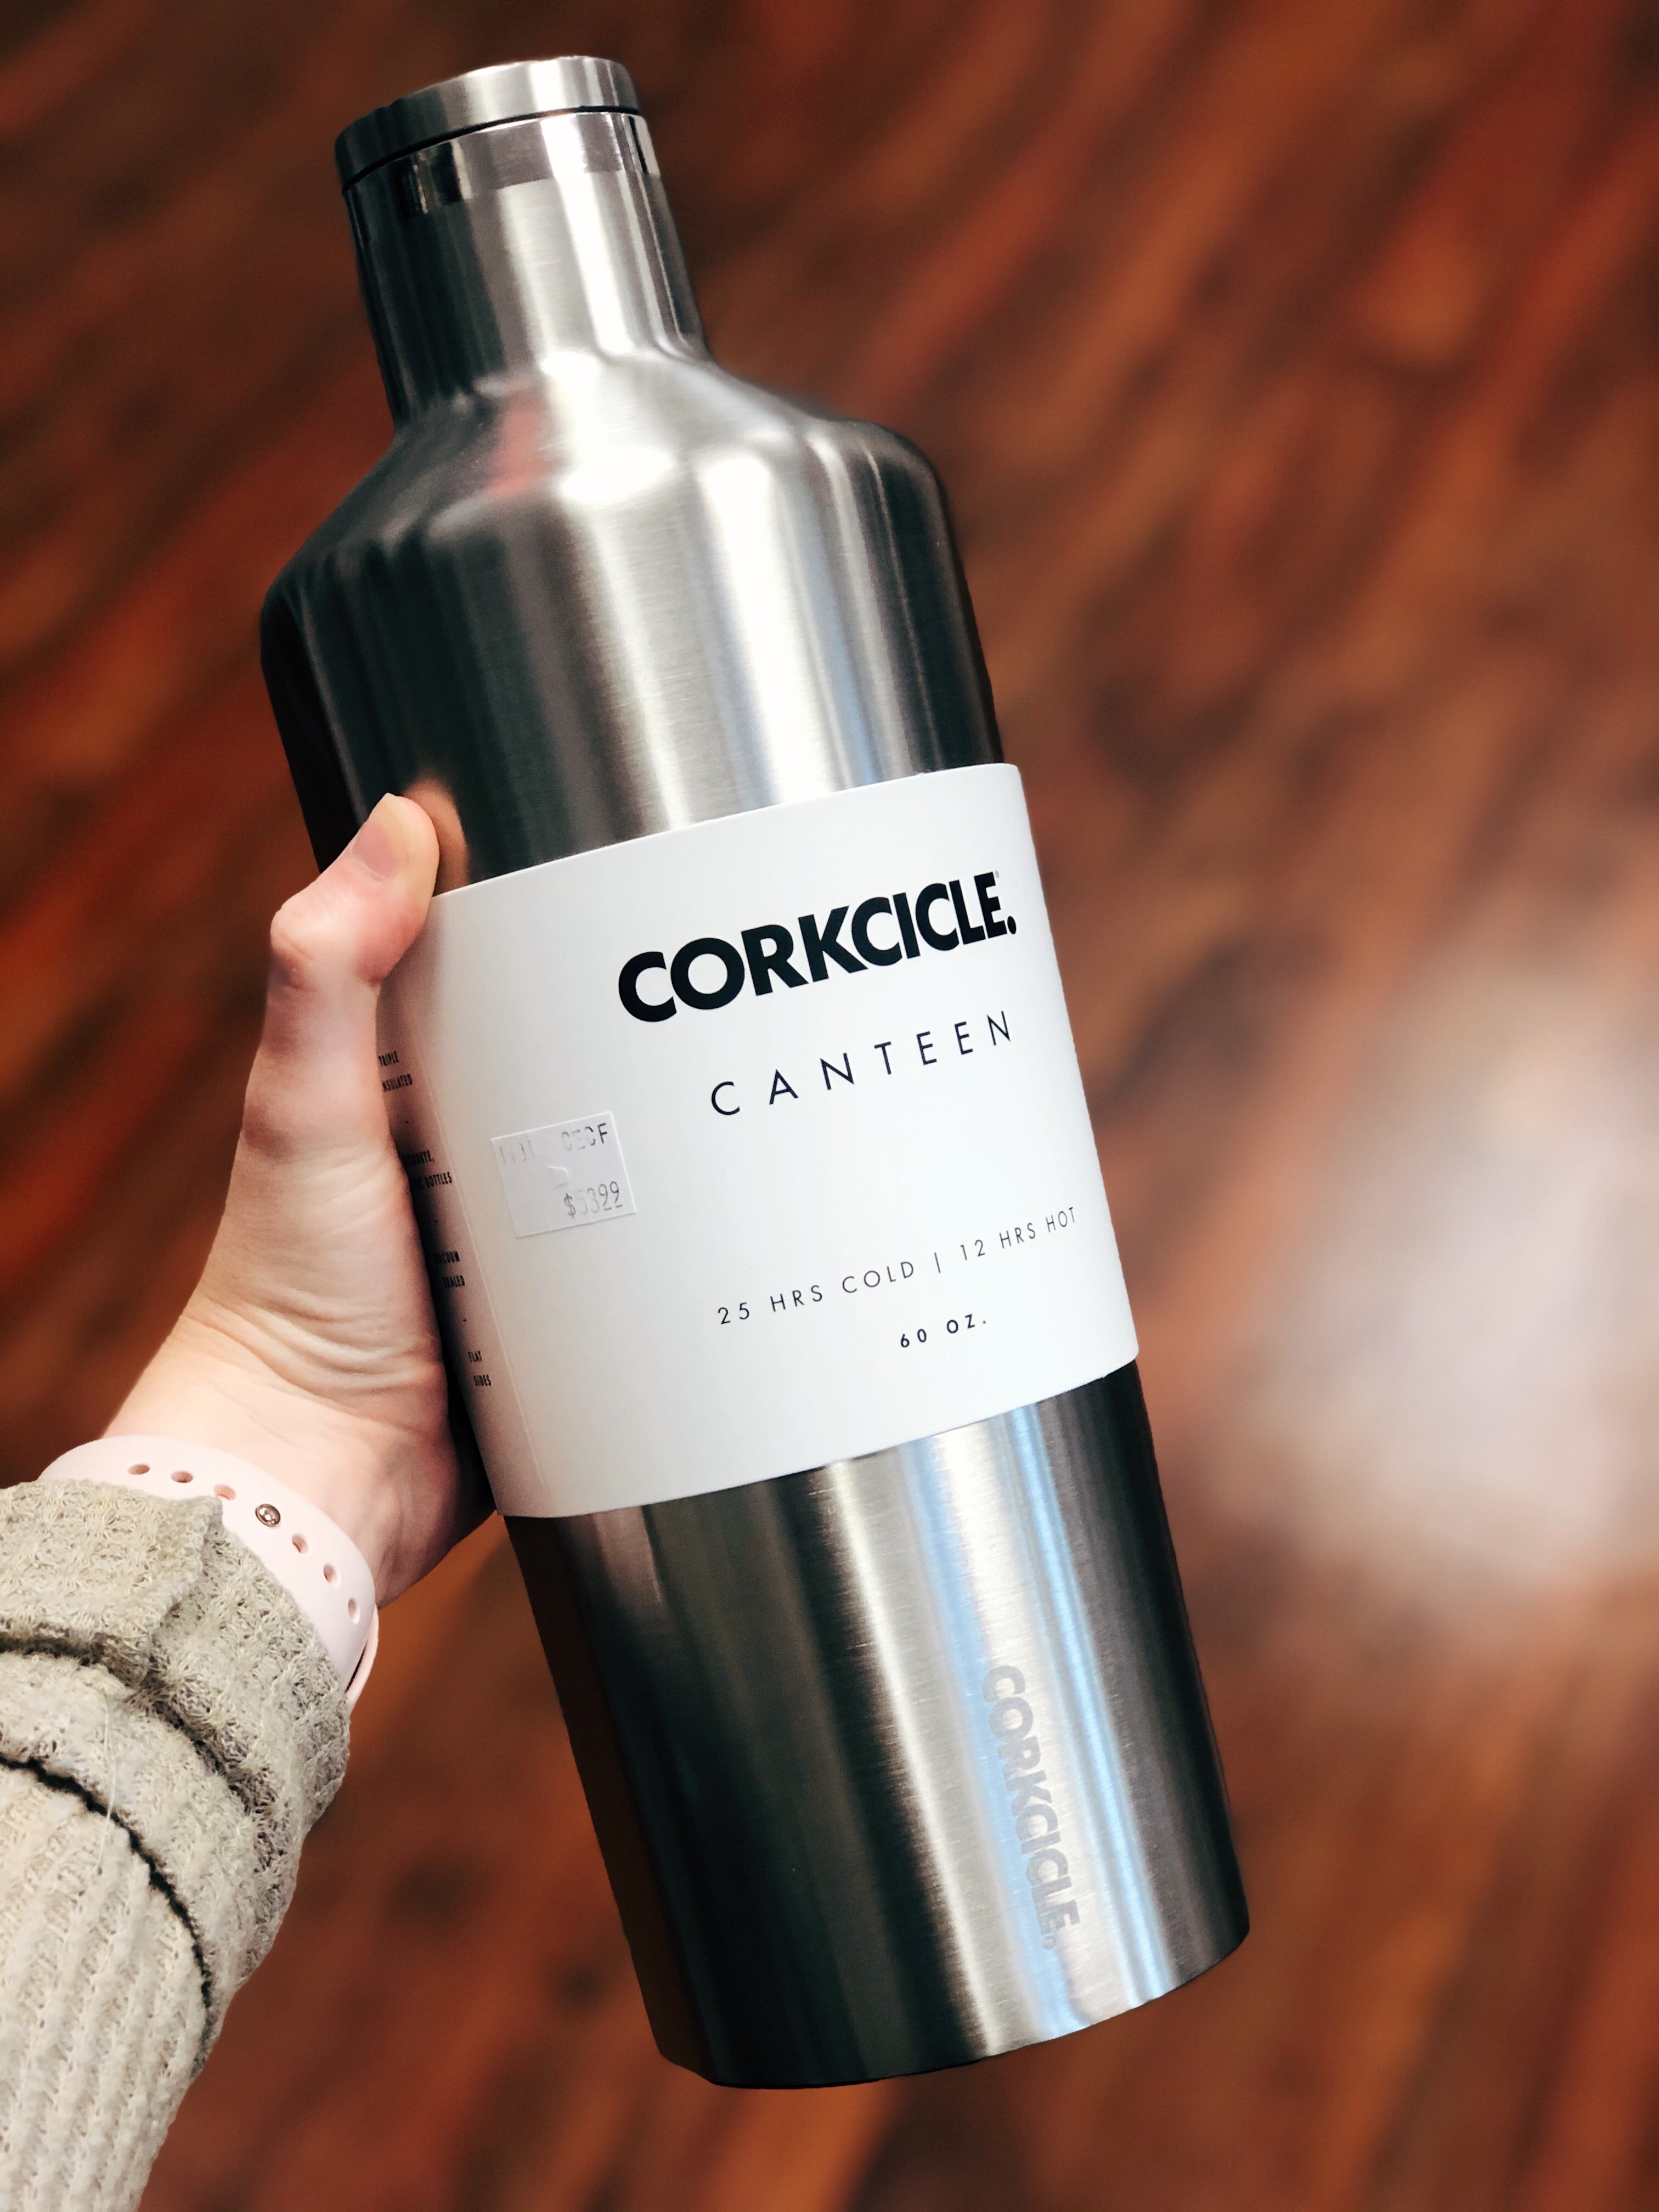 The Corkcicle Vinnebago is a wine canteen that can - CNET